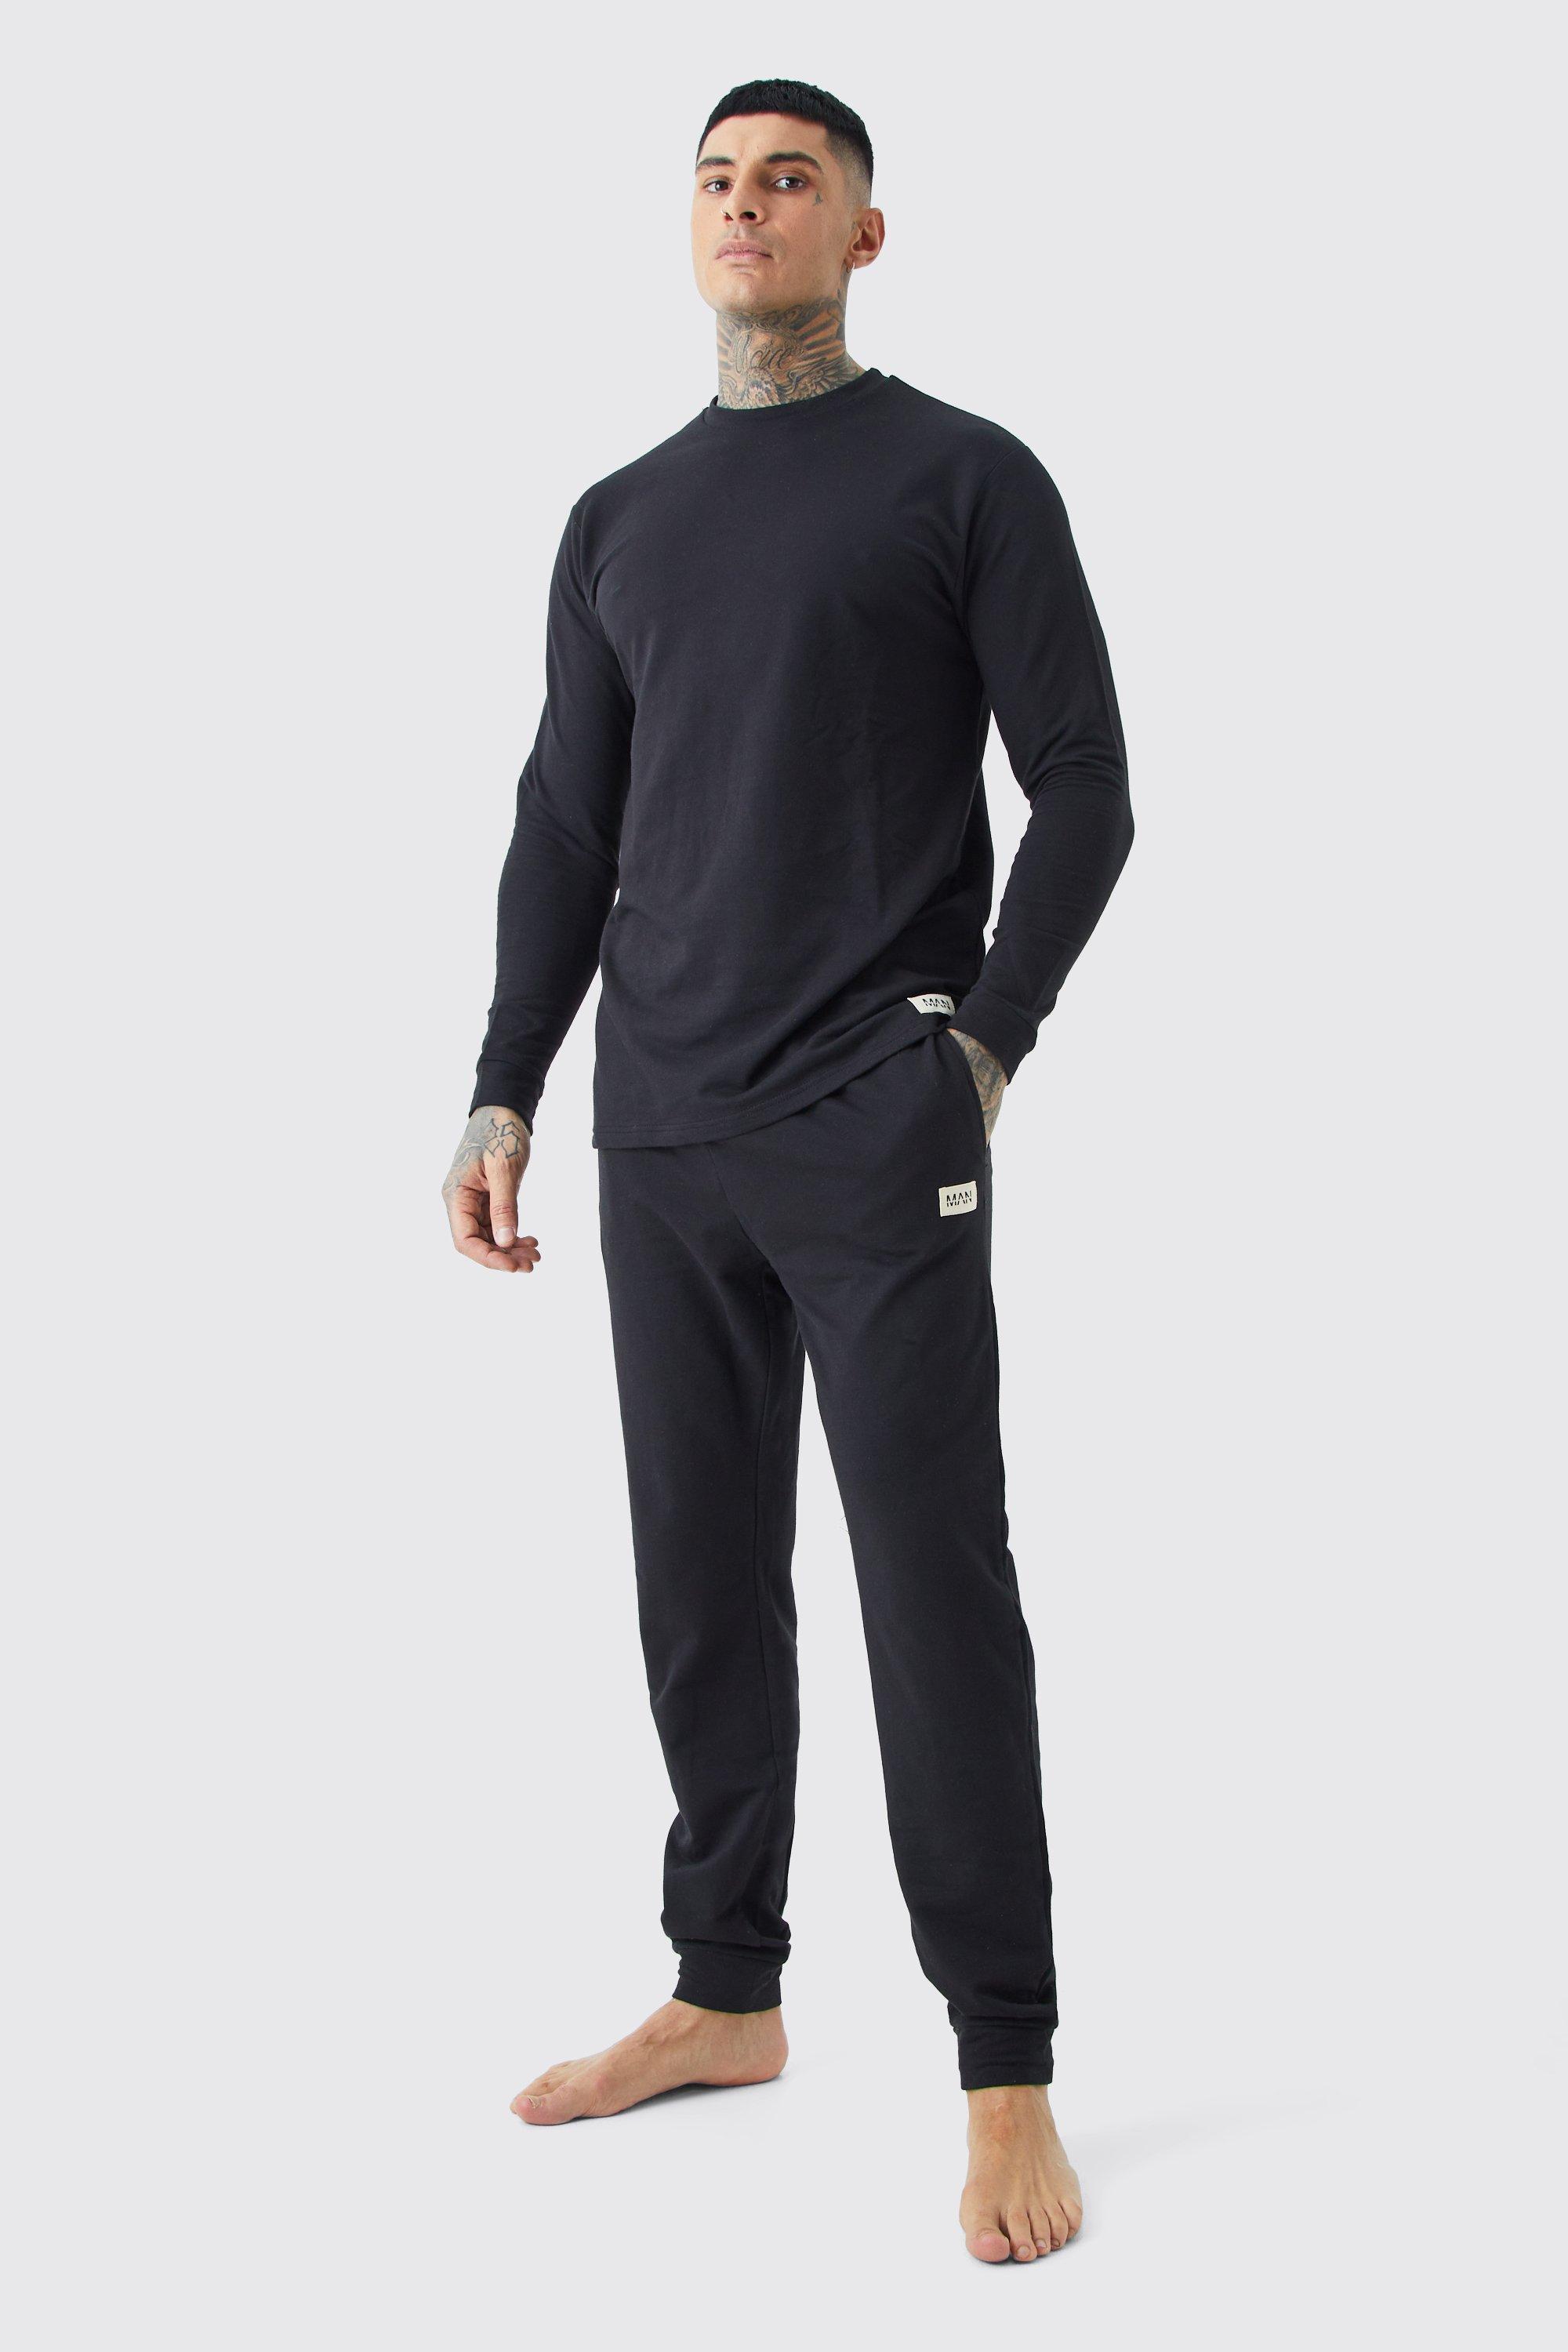 Mens Black Tall Soft Feel Lounge Top And Jogger Set, Black